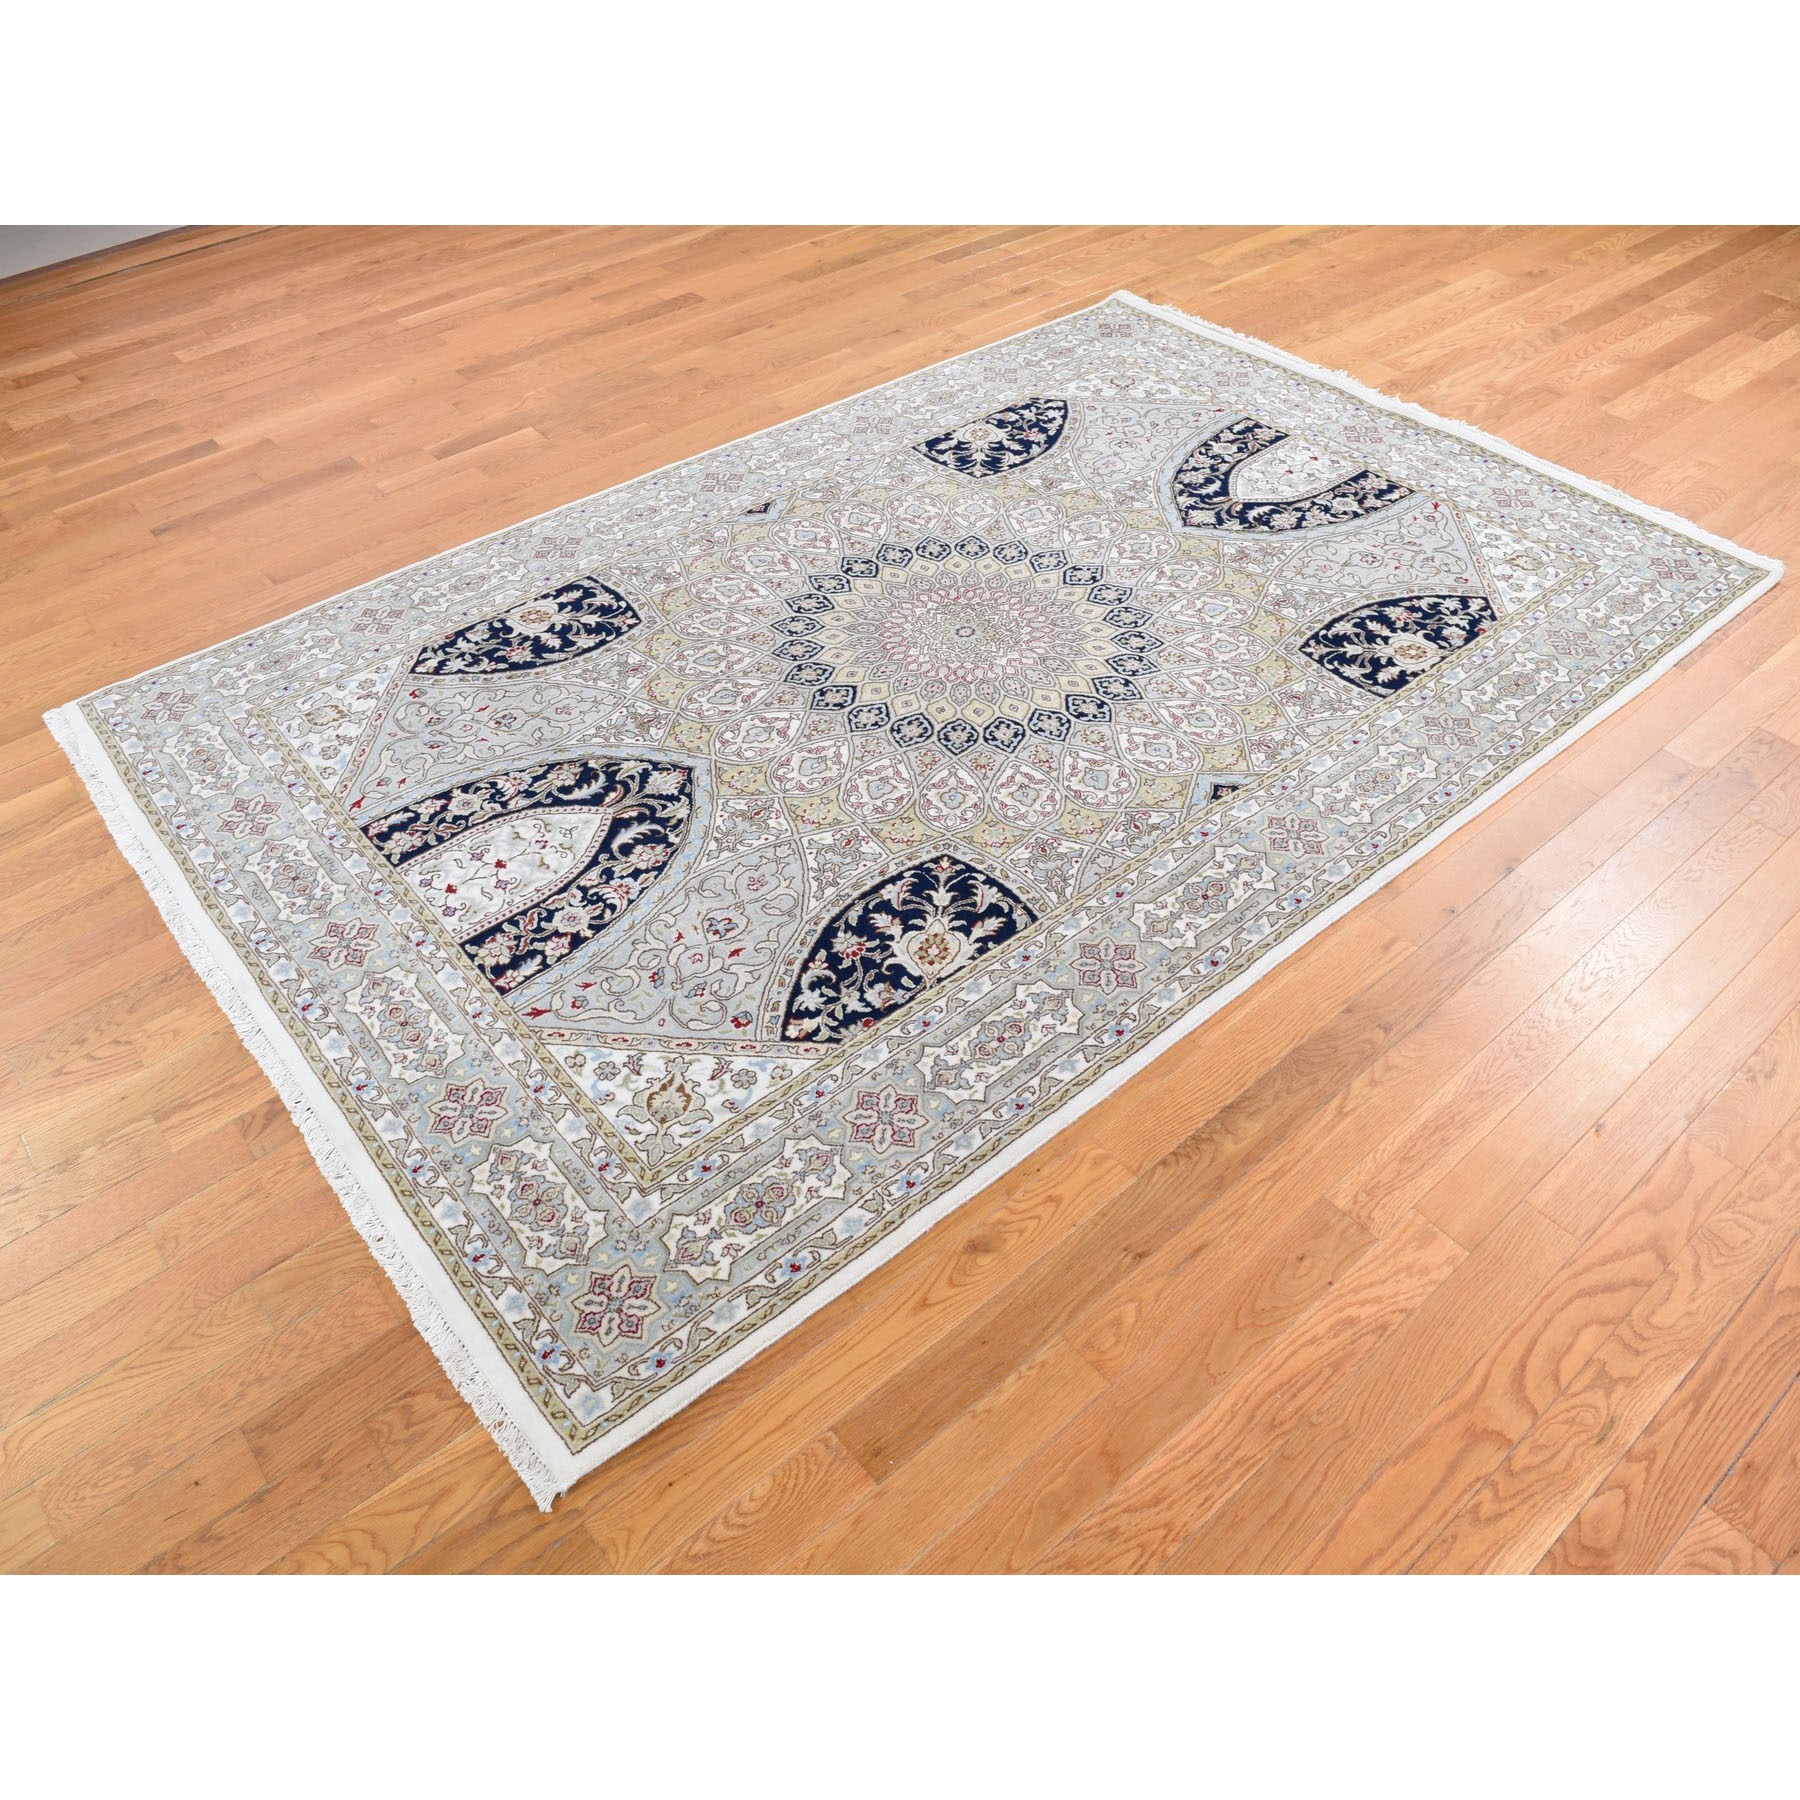 6-x9- Gray Nain With Gumbad Design Wool and Silk Hand Knotted Oriental Rug 